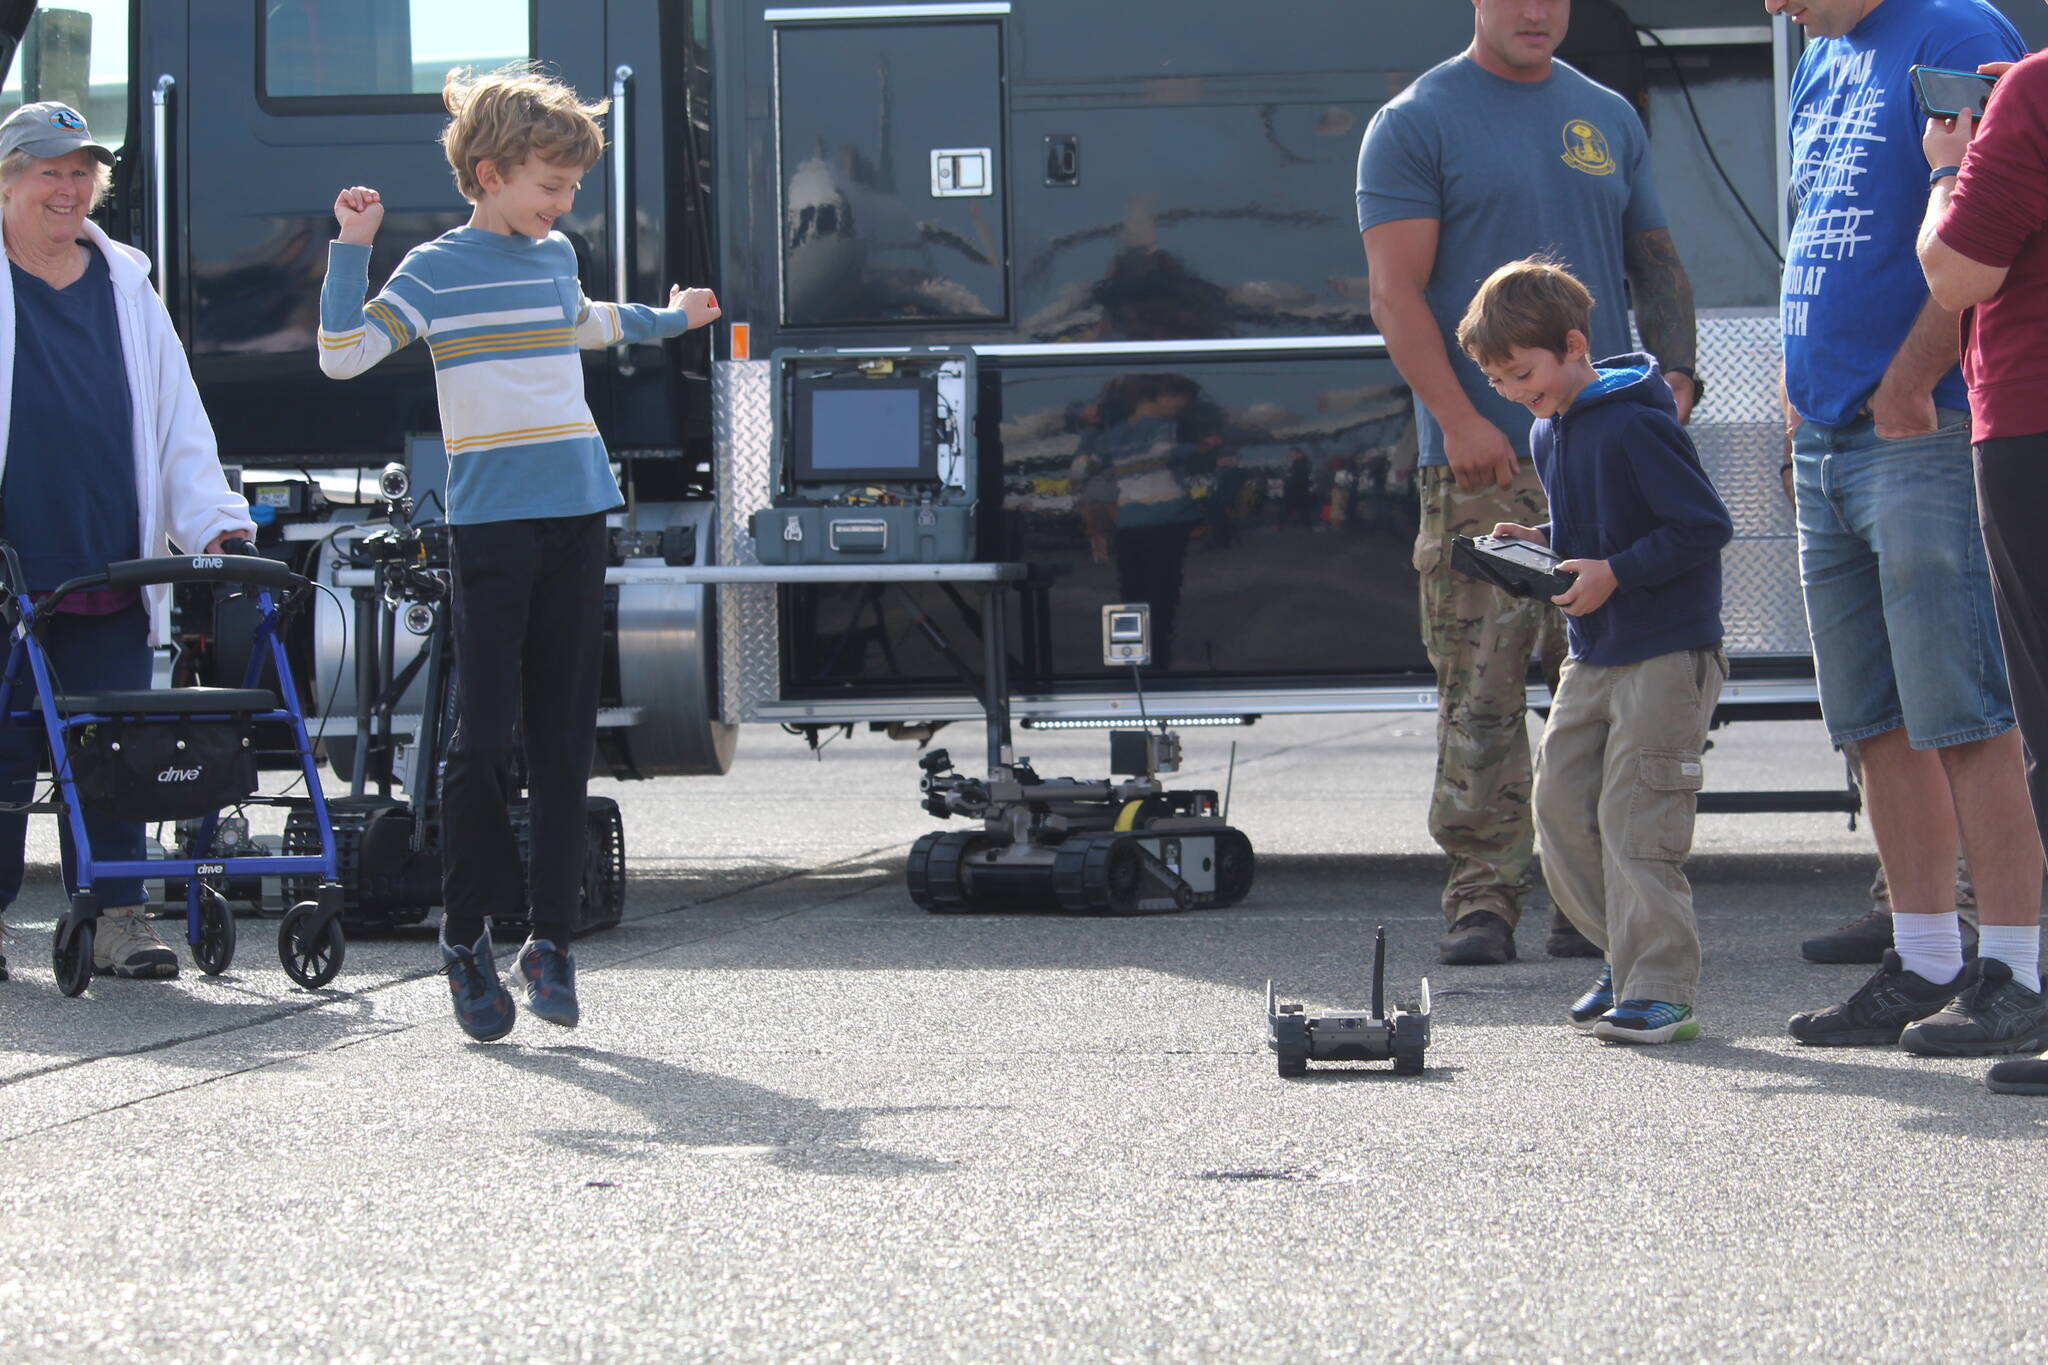 Photo by Karina Andrew/Whidbey News-Times
Kids play with a remote controlled vehicle at the base open house.